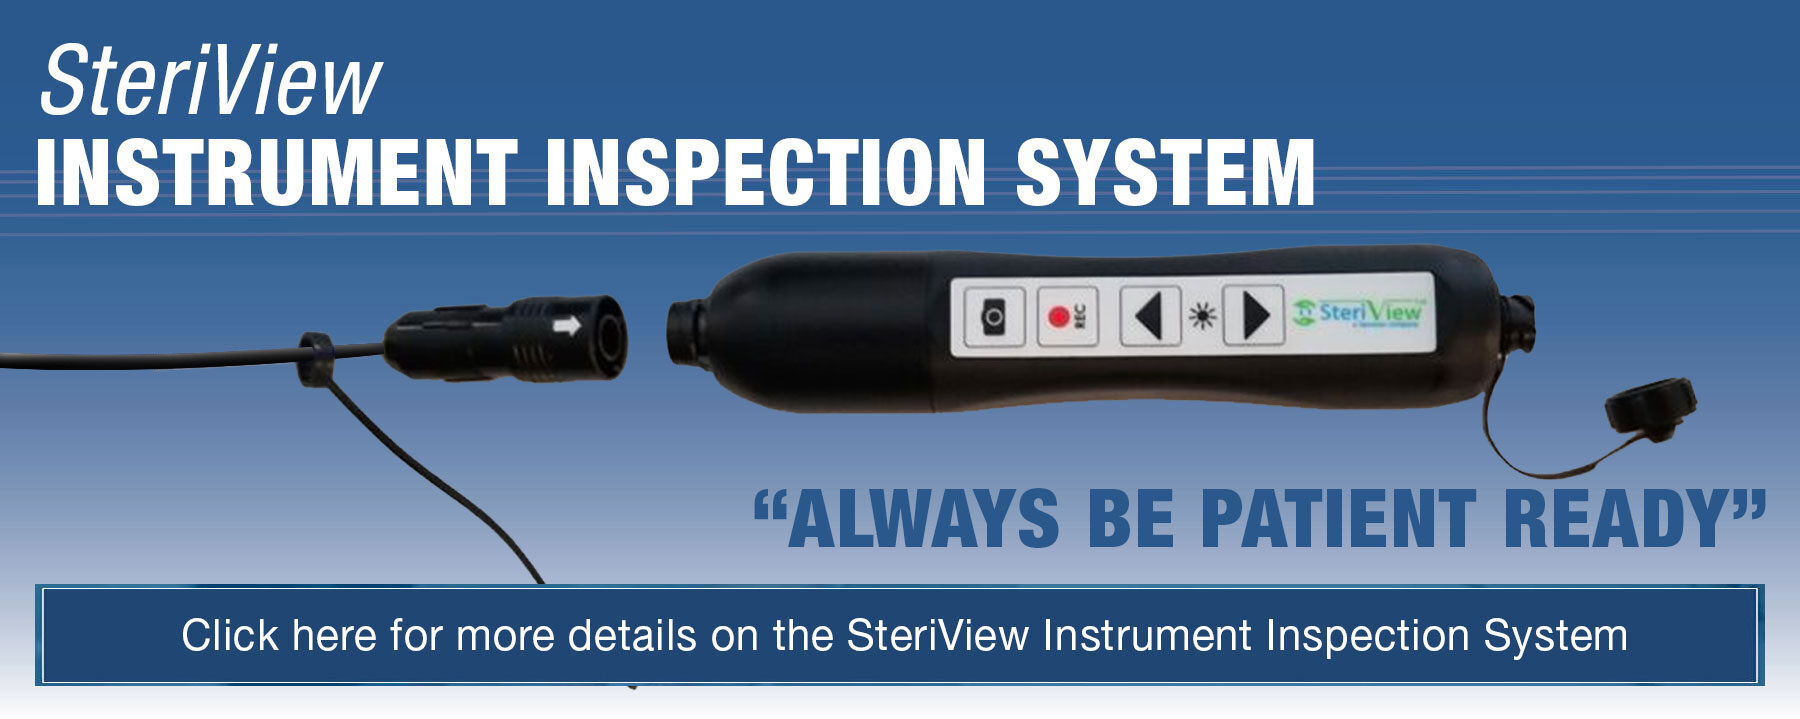 Steriview Instrument Inspection System